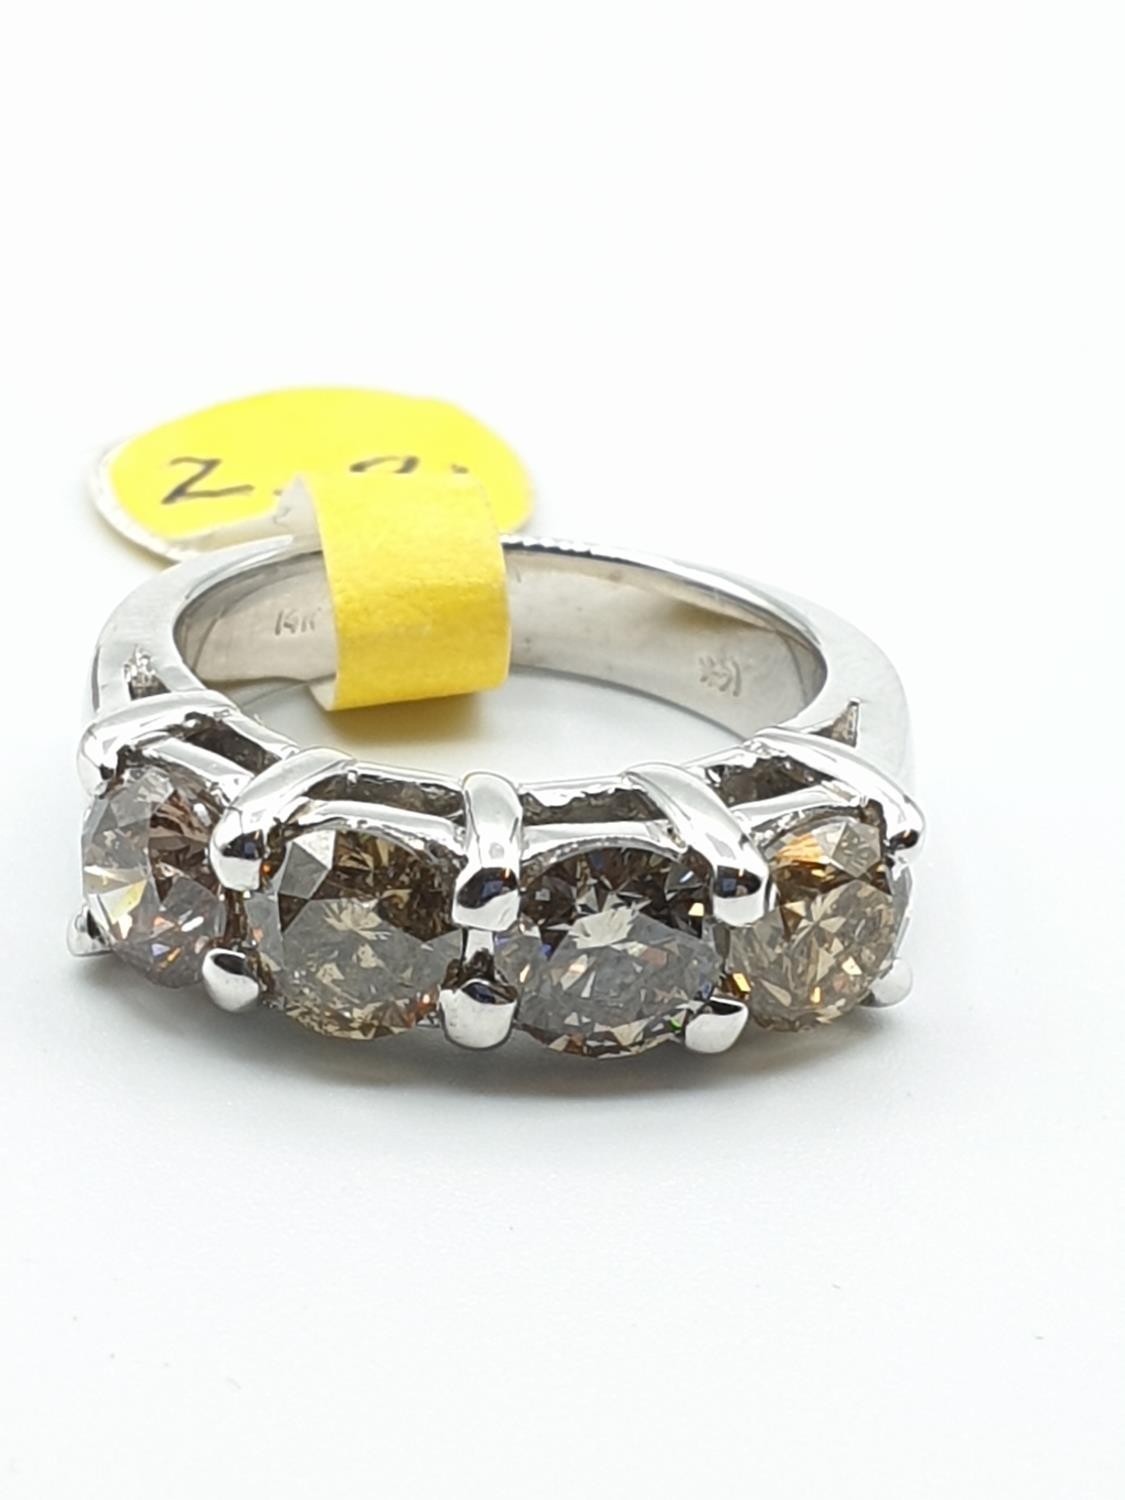 14ct white gold 4 champagne diamond ring (just under 3ct in total), weight 7.6g and size M - Image 6 of 10